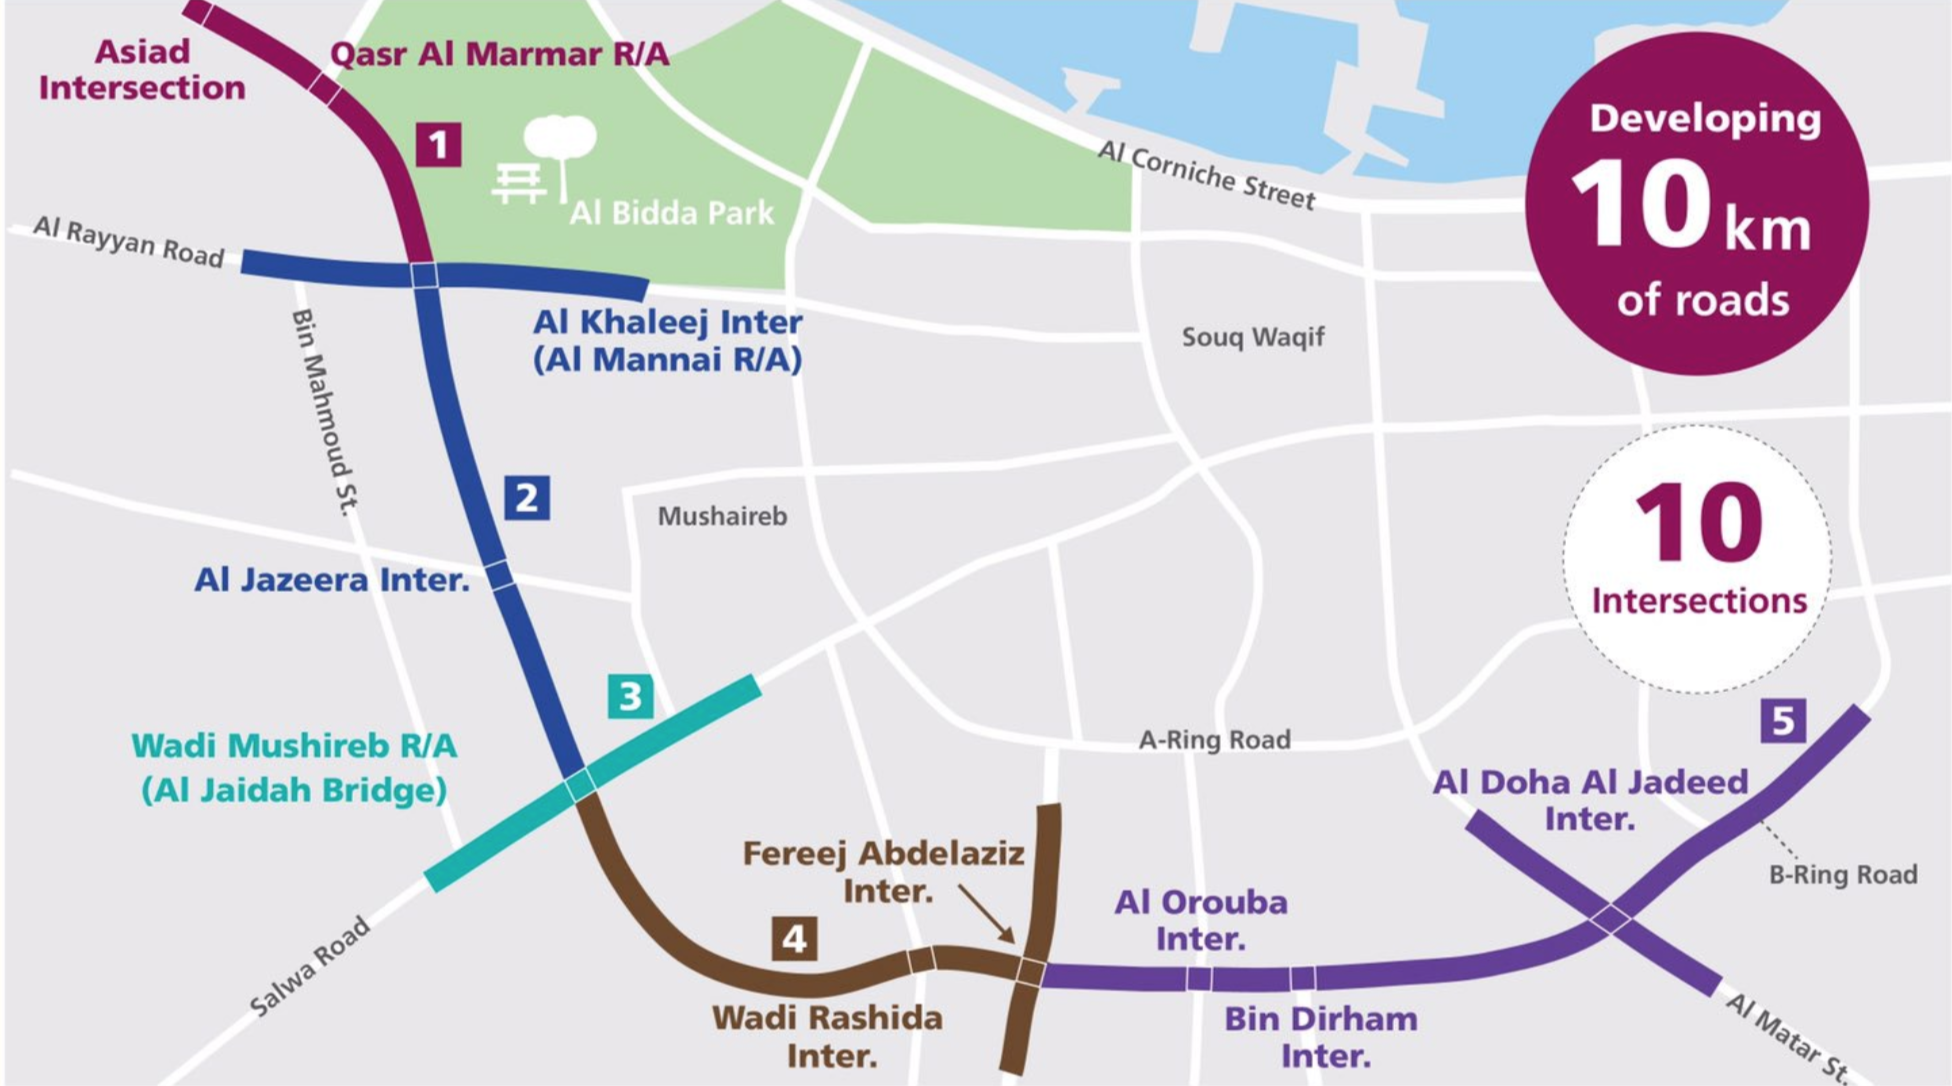 Ashghal begins the development of the C Ring Road